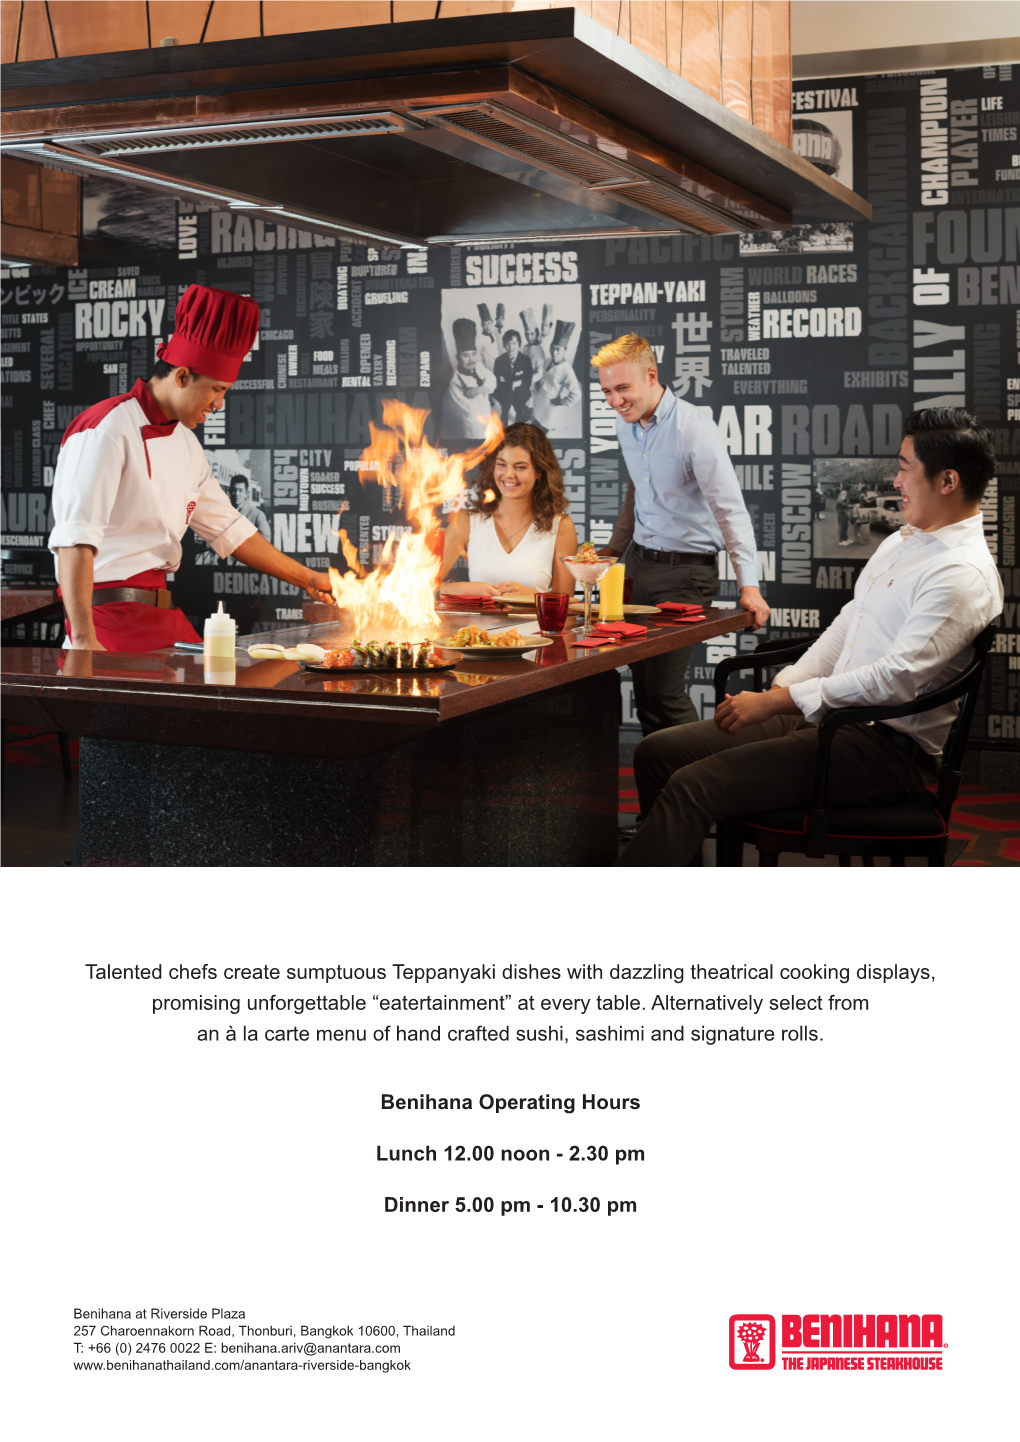 Talented Chefs Create Sumptuous Teppanyaki Dishes with Dazzling Theatrical Cooking Displays, Promising Unforgettable “Eatertainment” at Every Table